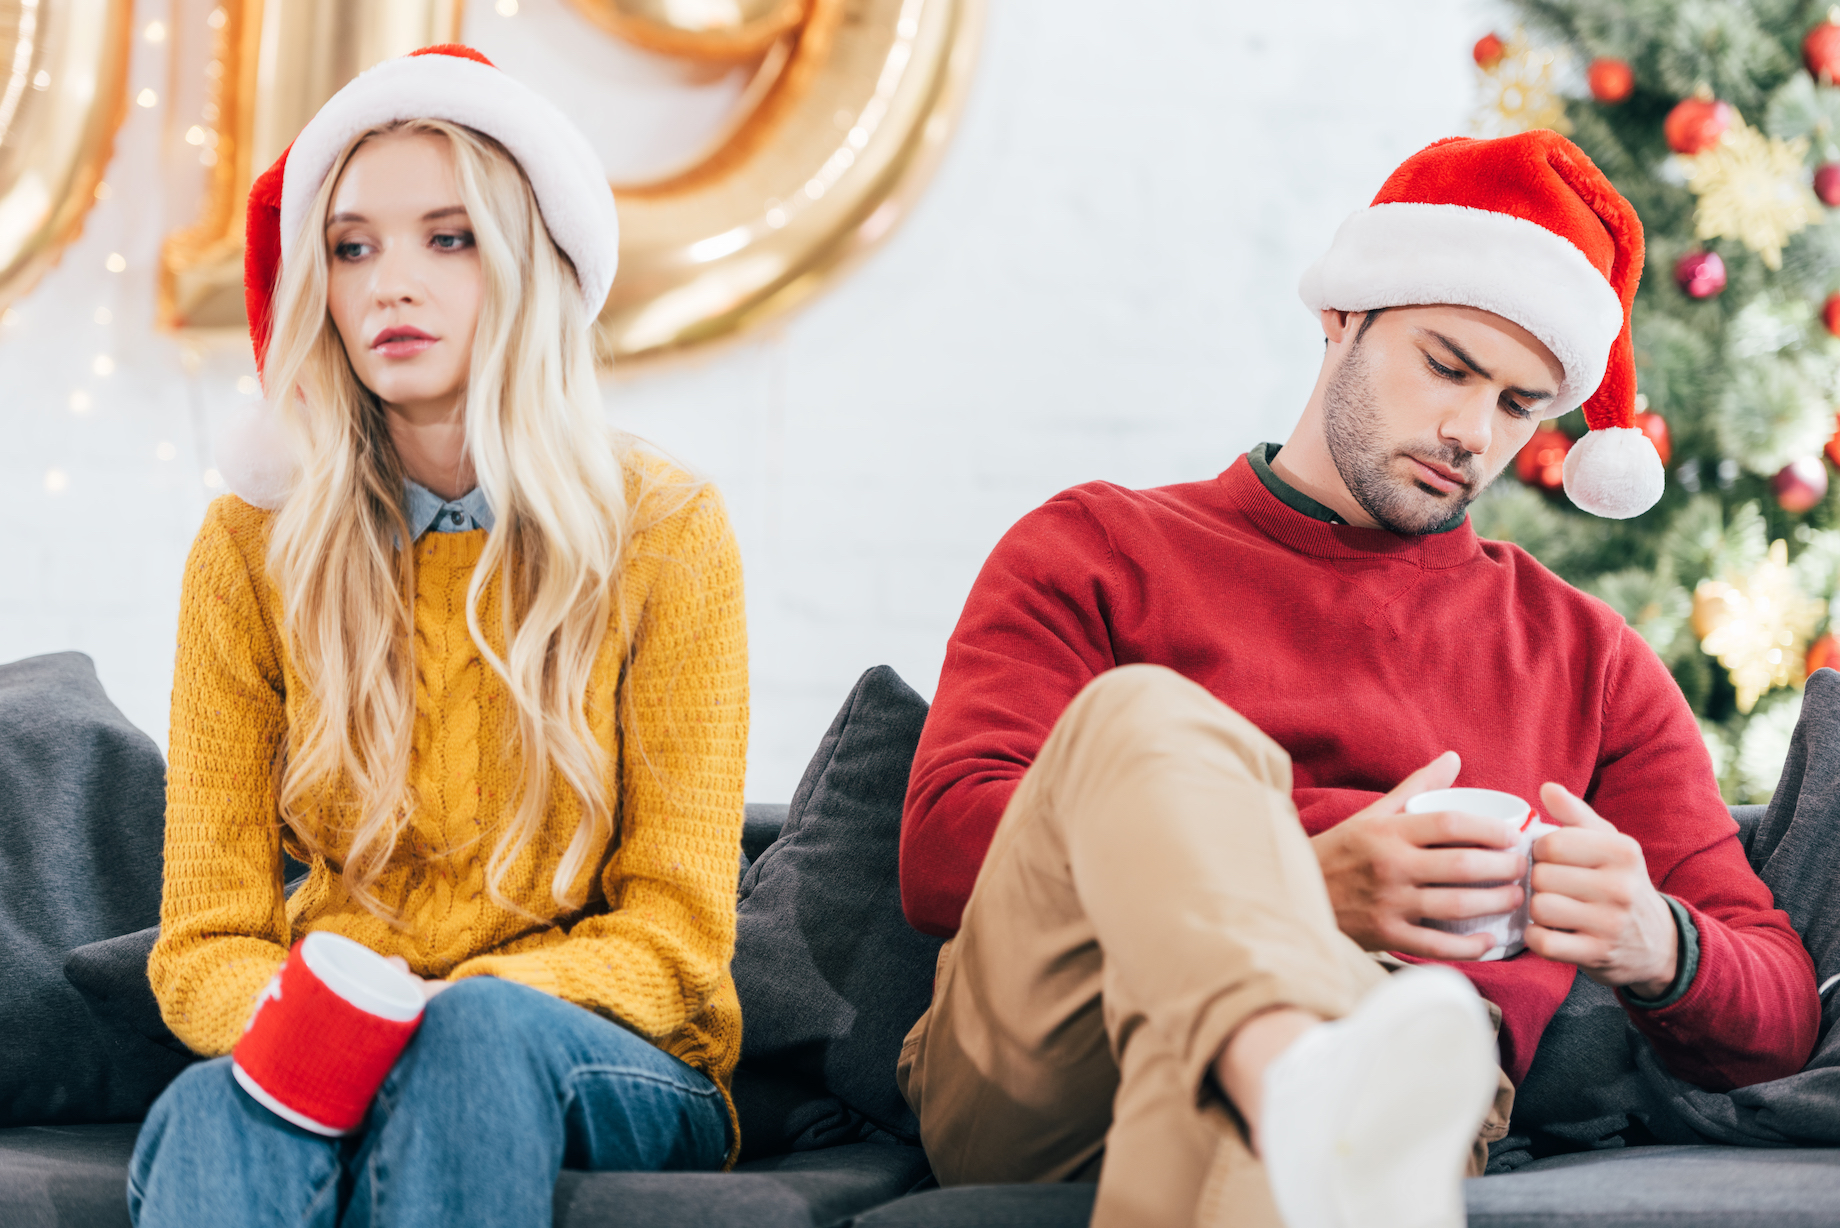 Deal with Family During Holidays can Be Stressful and Source of Pain